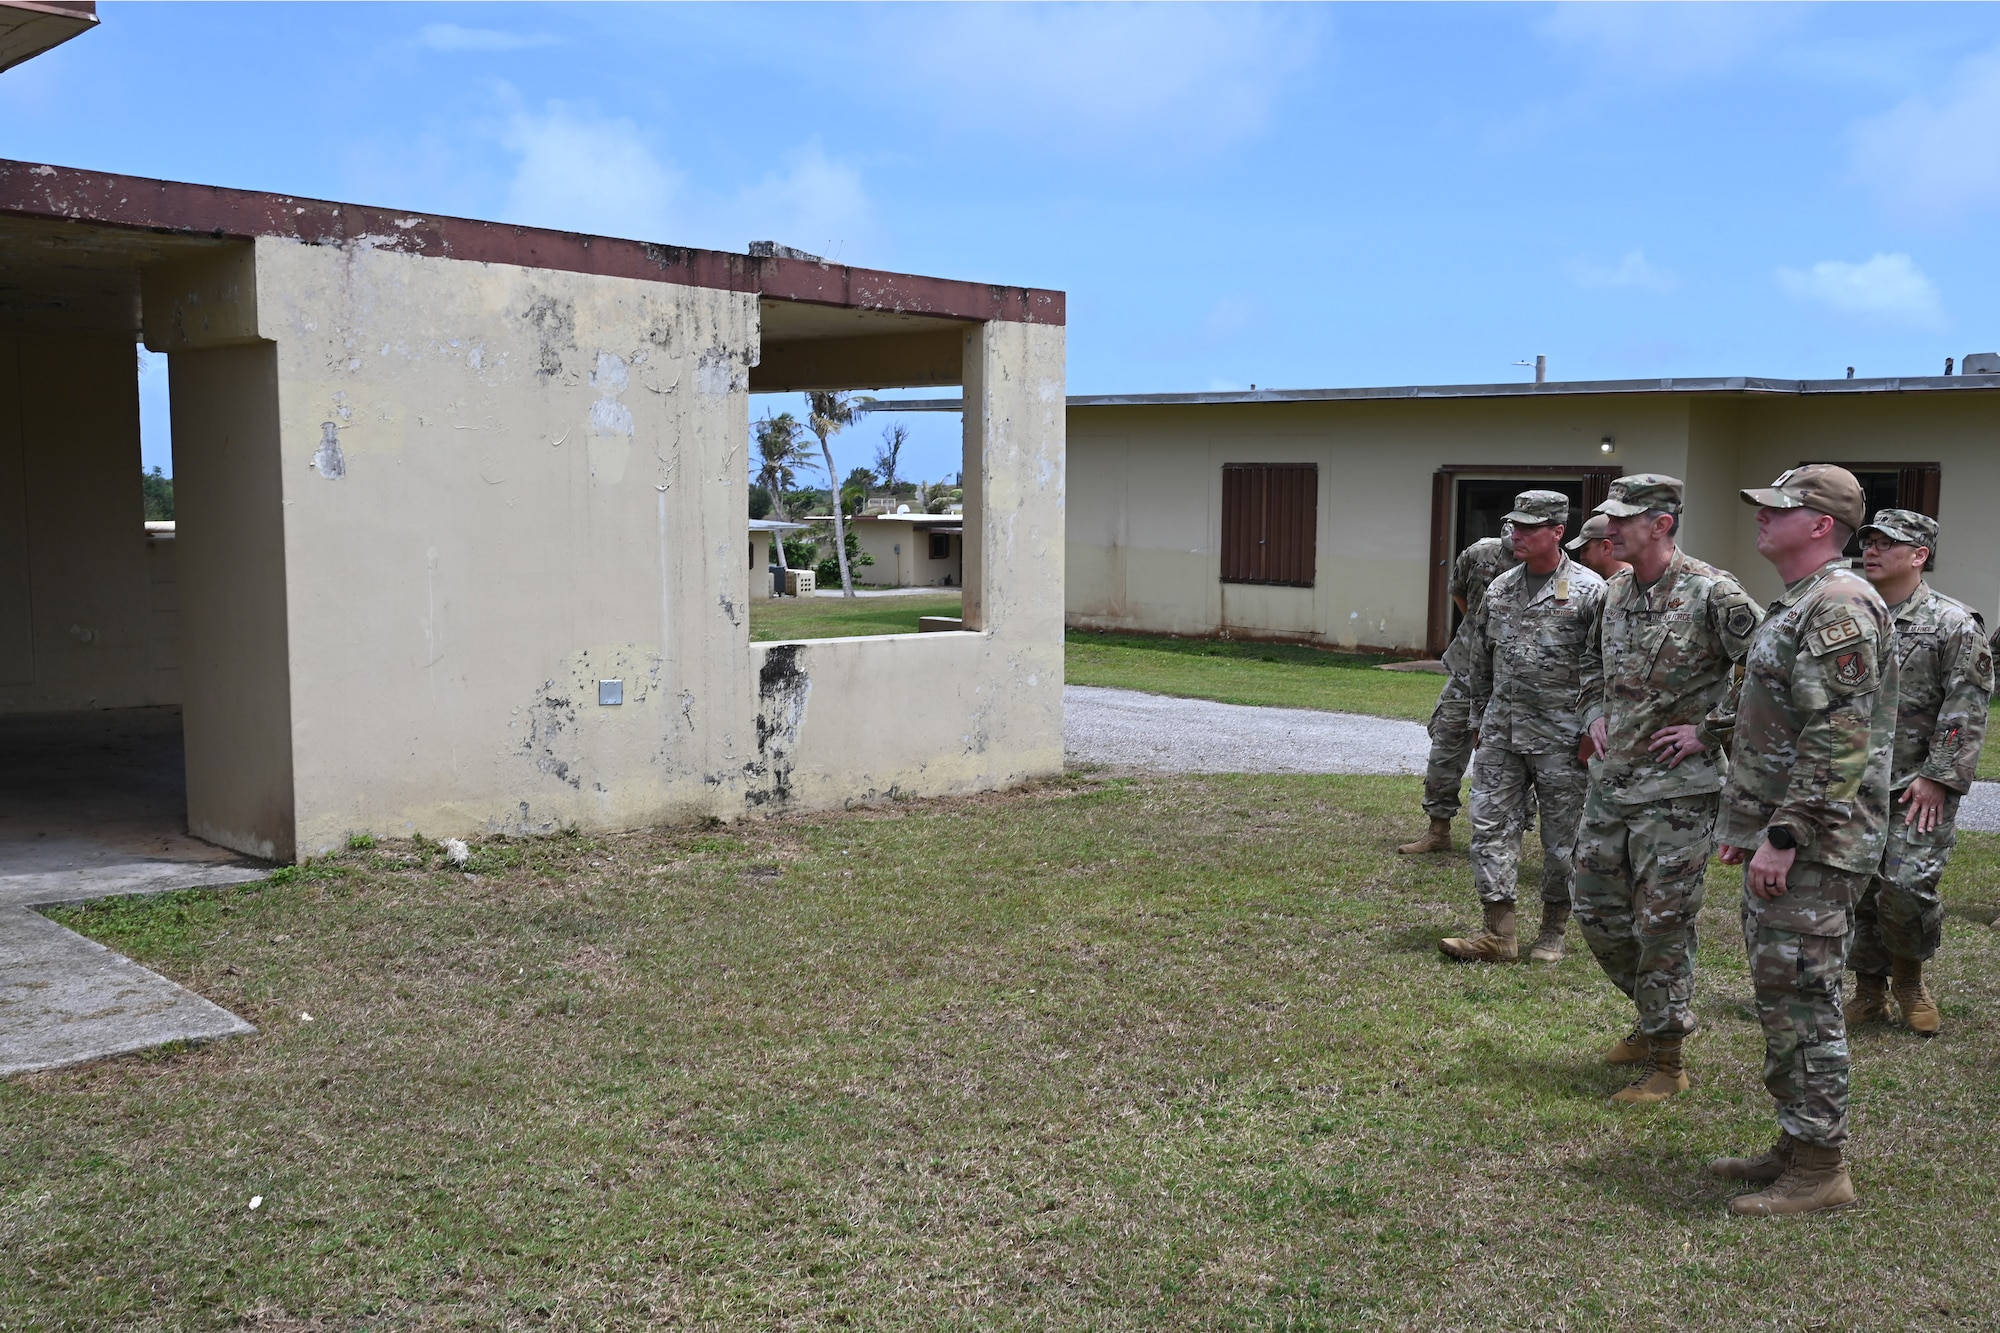 Airmen looks at damaged houses.